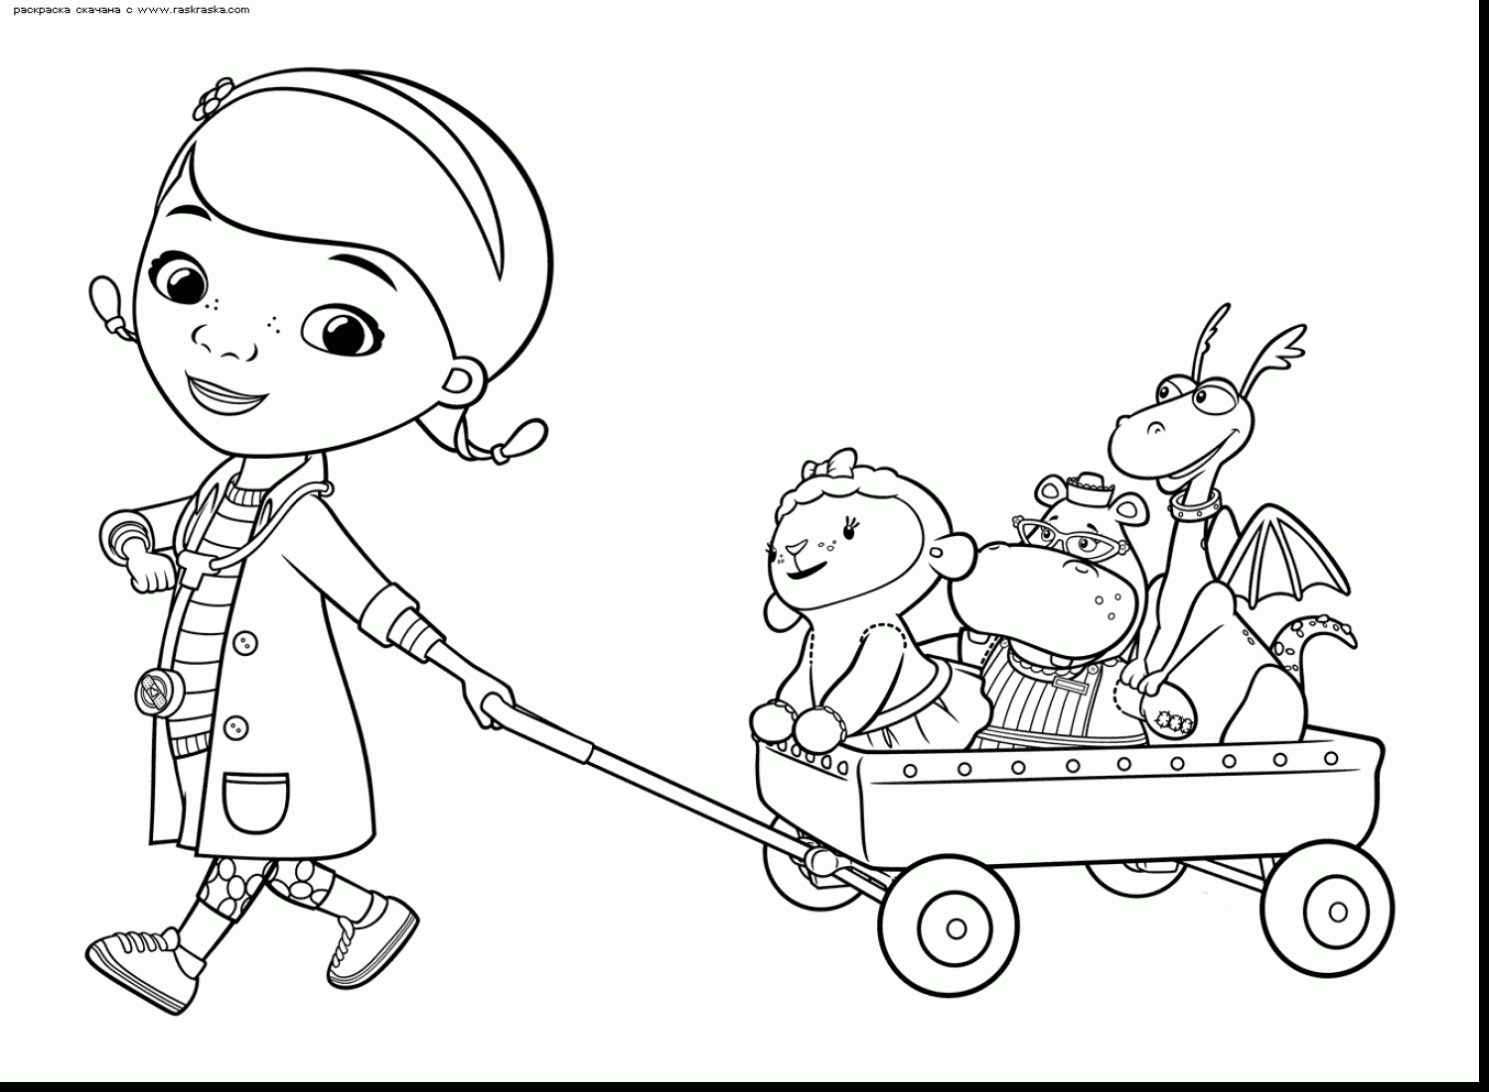 Doc Mcstuffins Toy Hospital Coloring Pages Doc Mcstuffins Friends Coloring Pages For Kids Printable Free